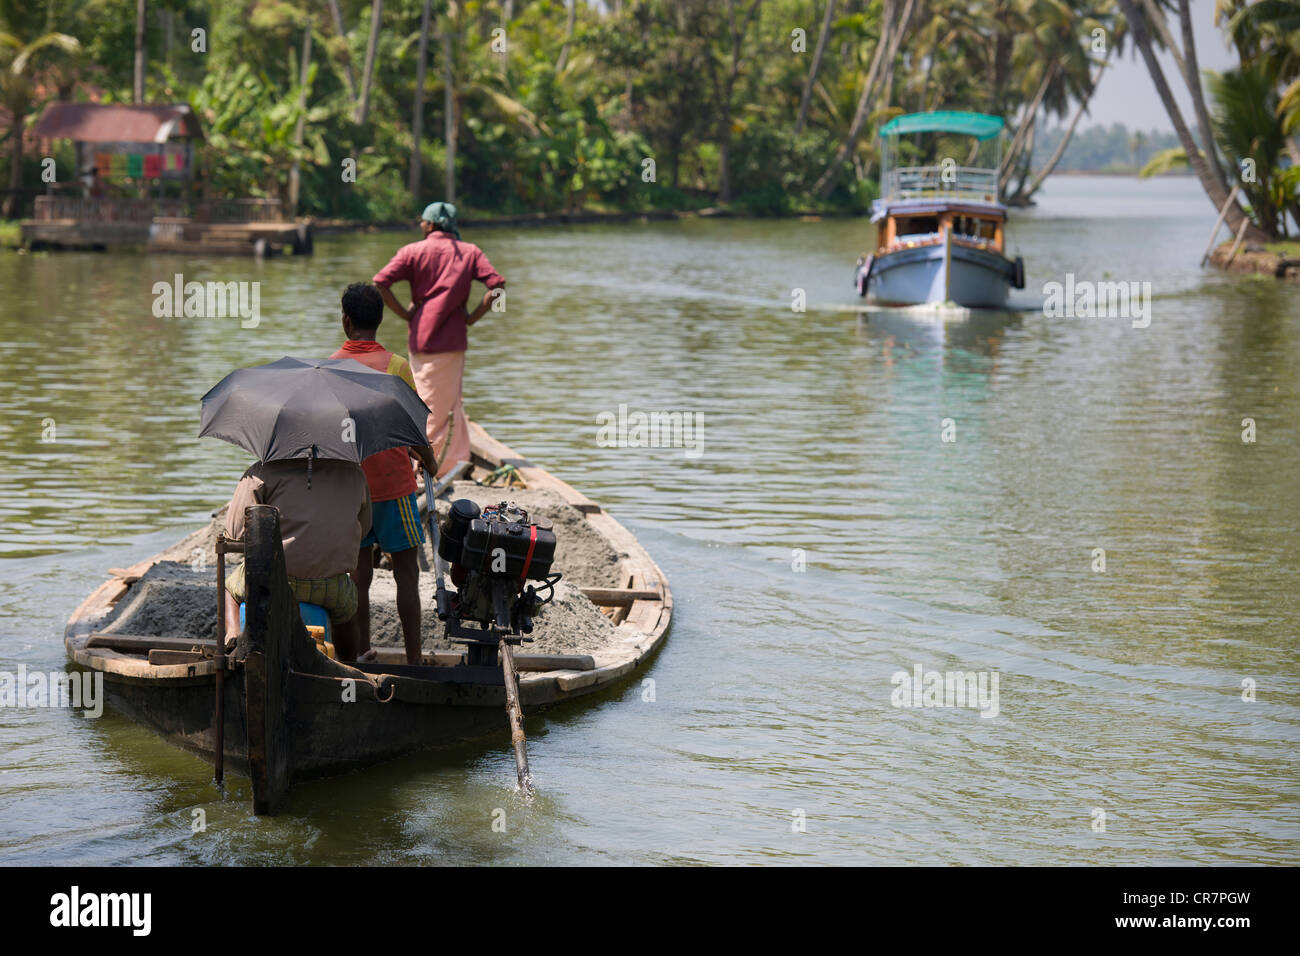 Tourist boat approaching a overloaded barge in a waterway of Vattakayal Lake, near Alappuzha (Alleppey), Kerala, India Stock Photo